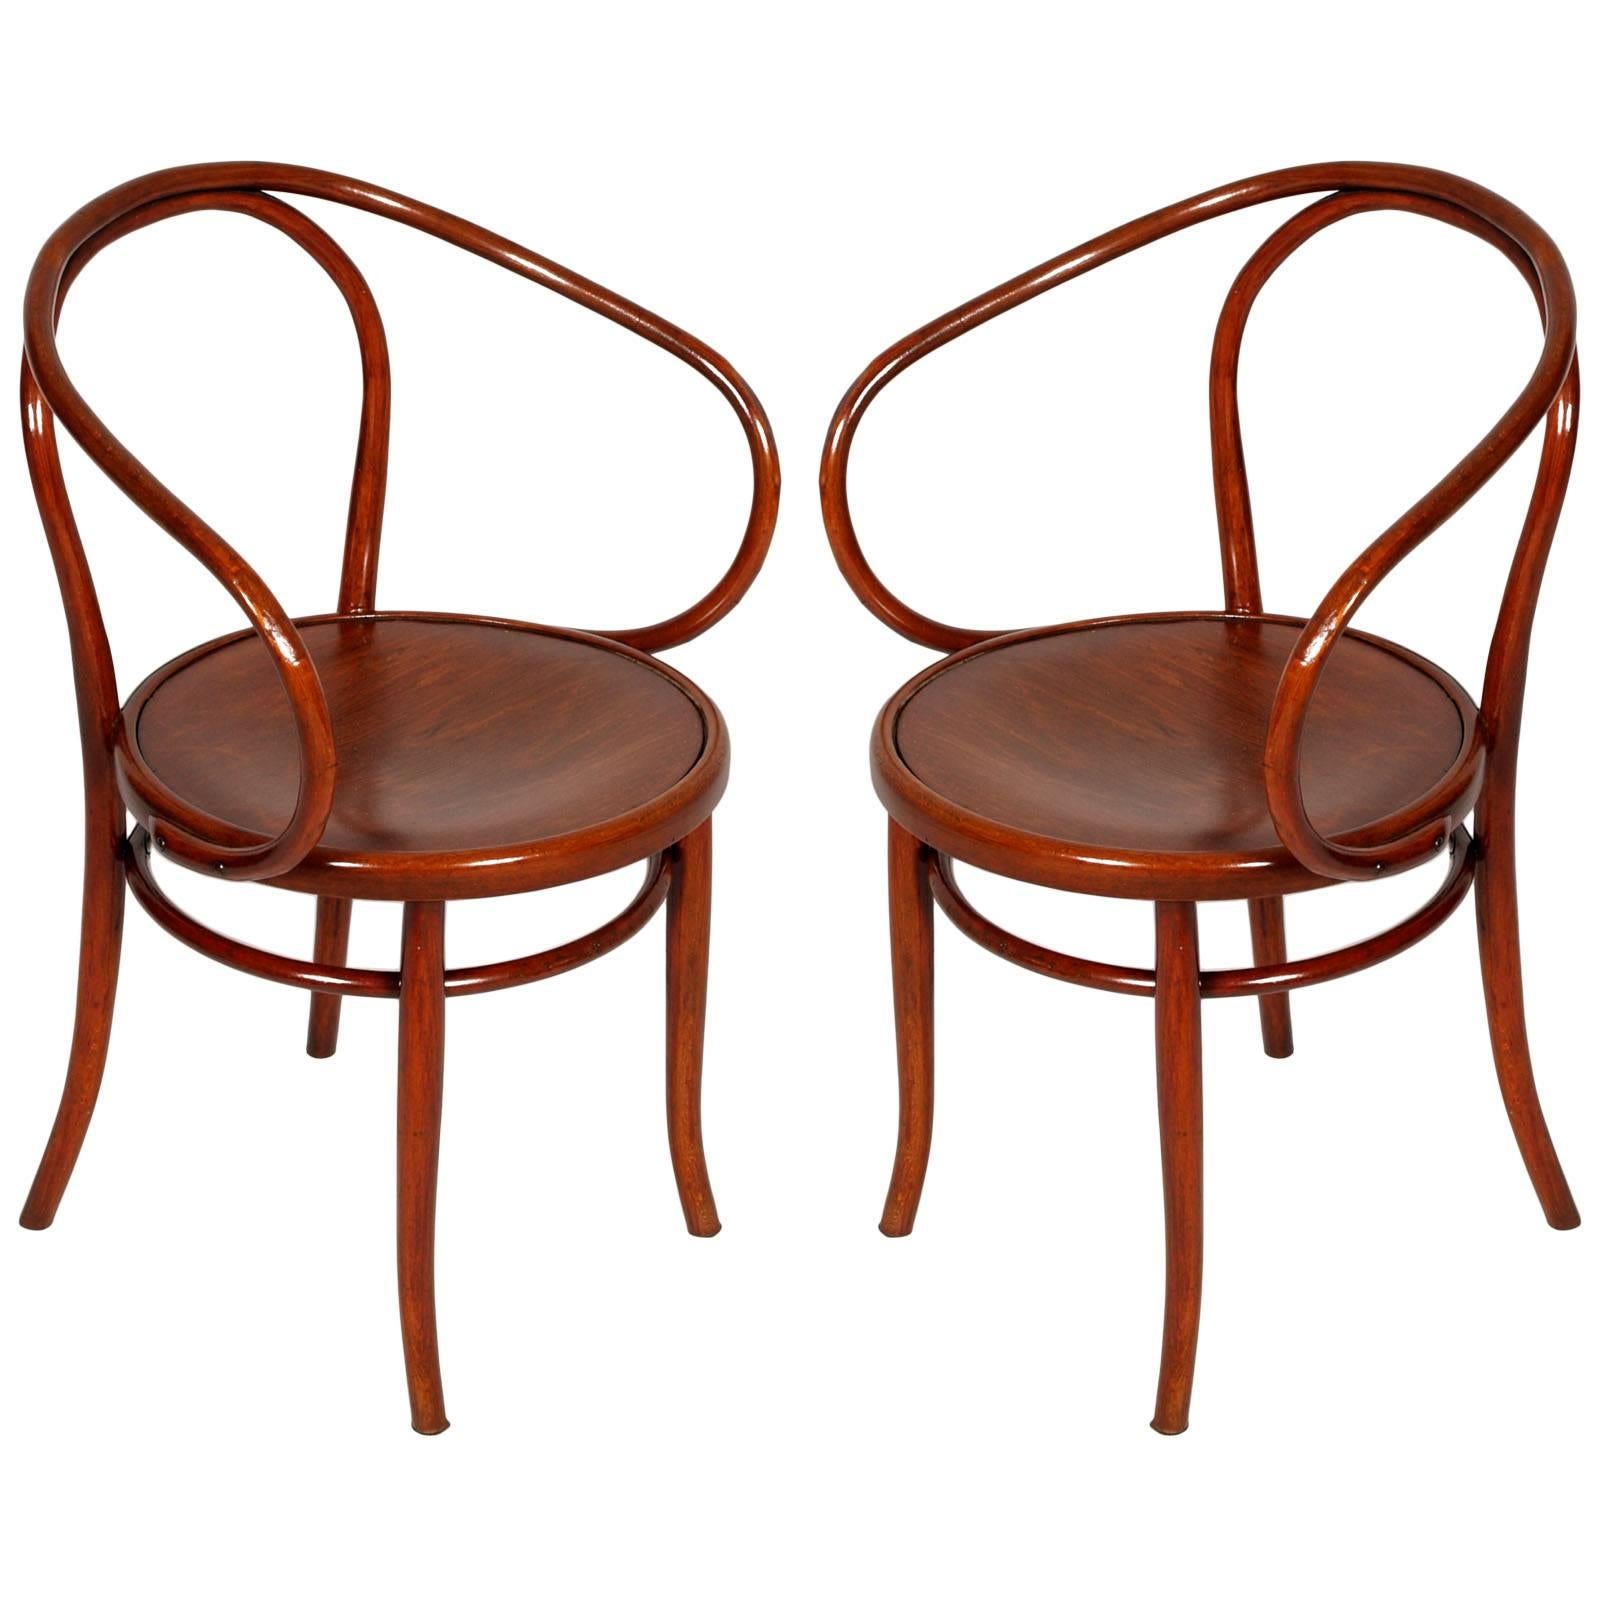 Late 19th Century Pair of Bentwood B-9 Armchairs by Jacob and Josef Kohn